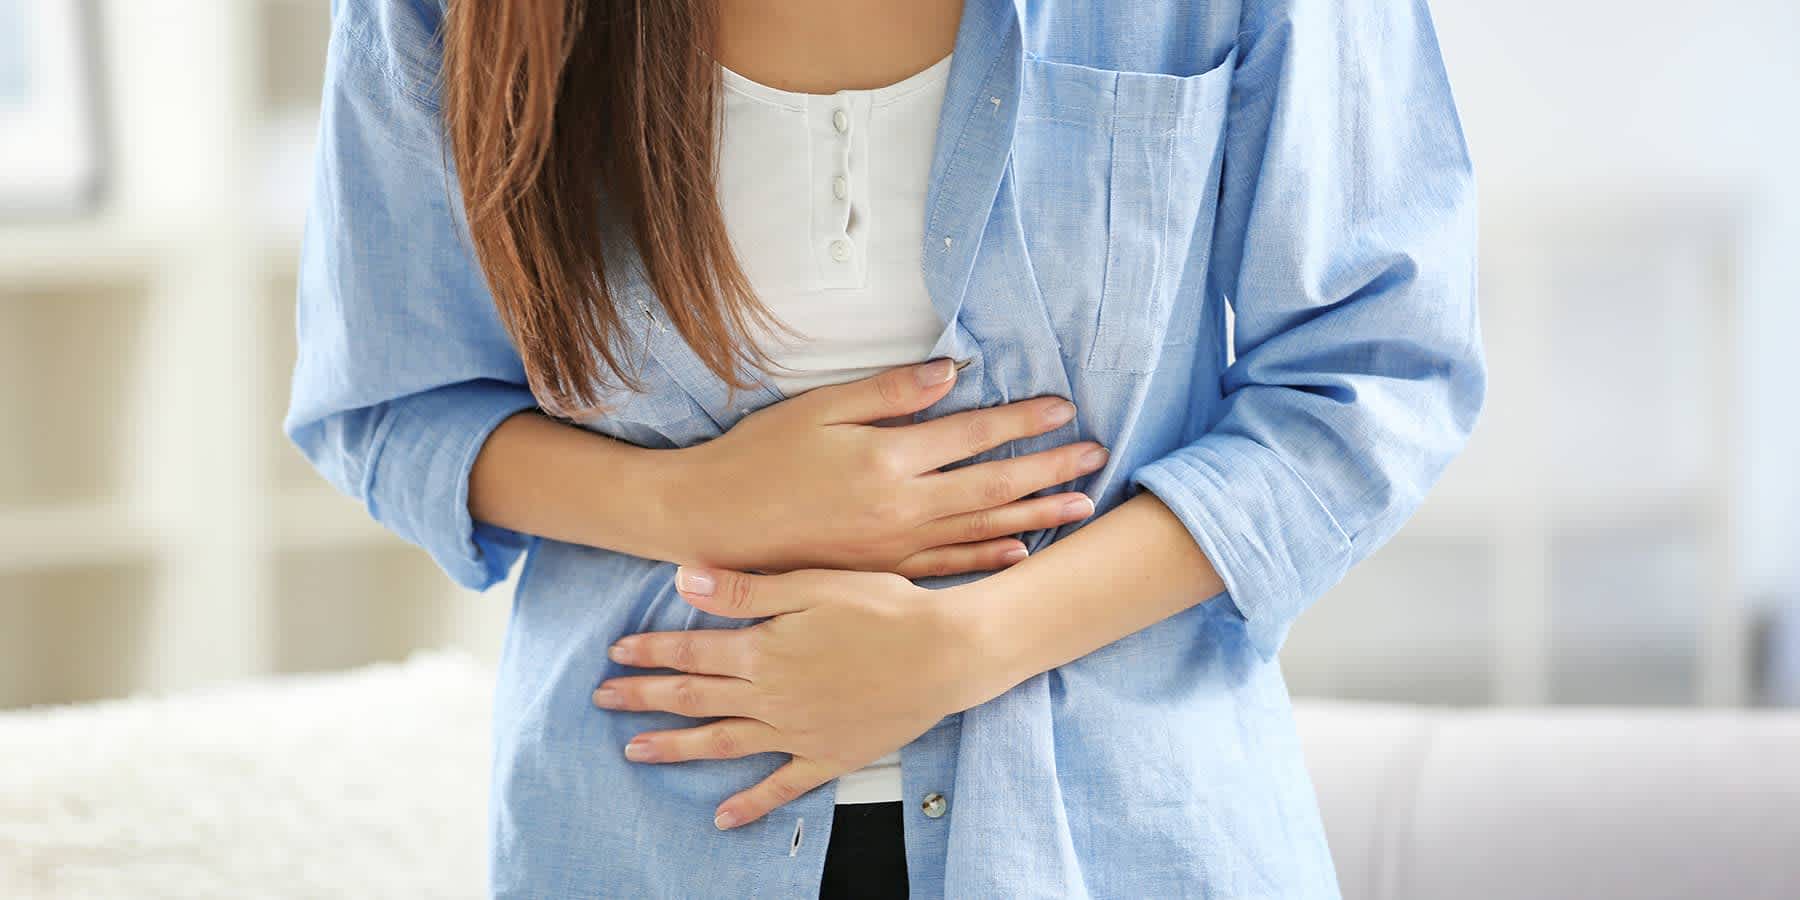 Signs that Your UTI Might be Getting Worse